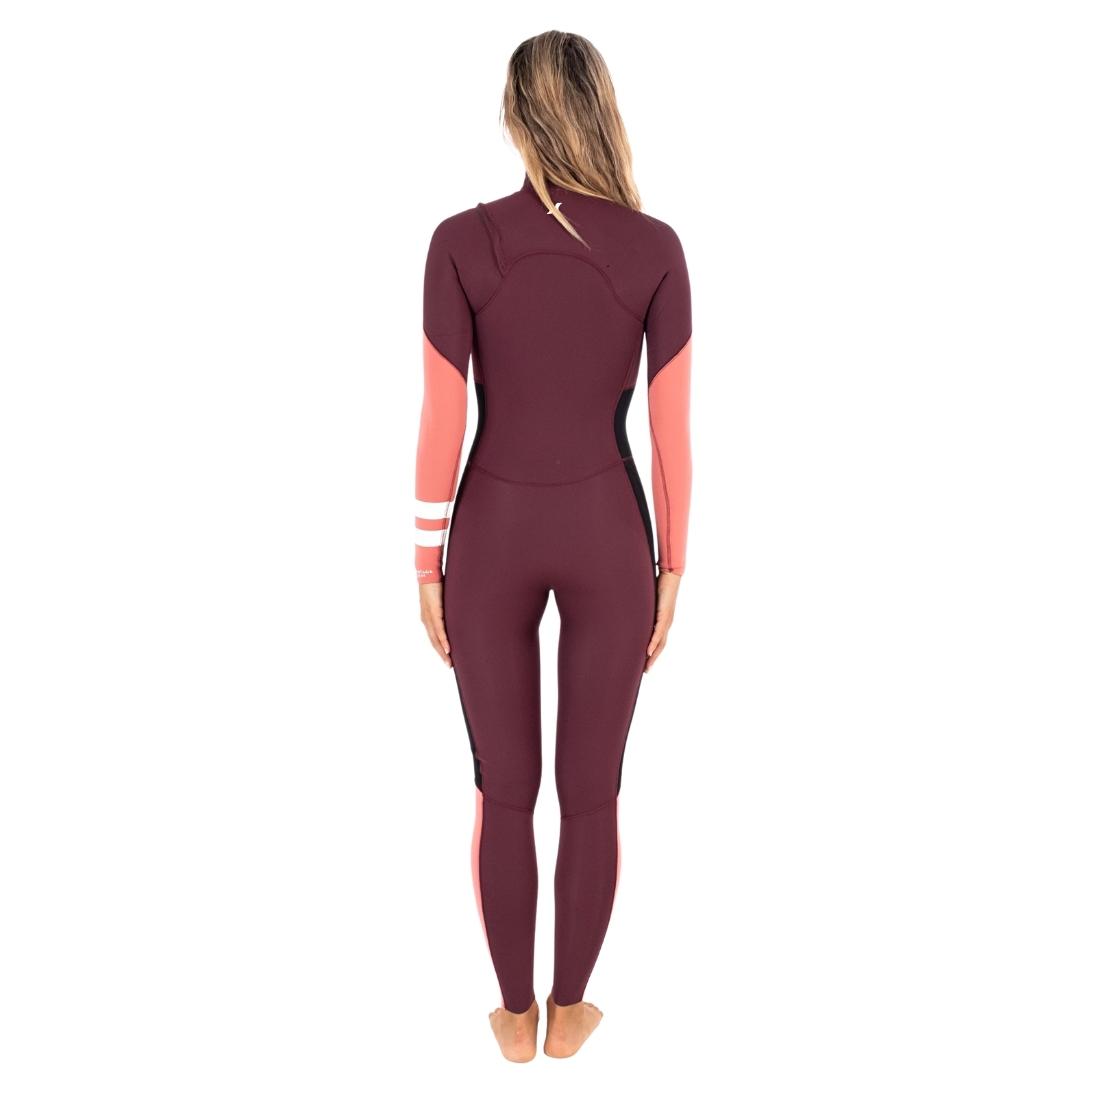 Hurley Womens Advantage 3/2mm Wetsuit - Winetesting - Womens Full Length Wetsuit by Hurley